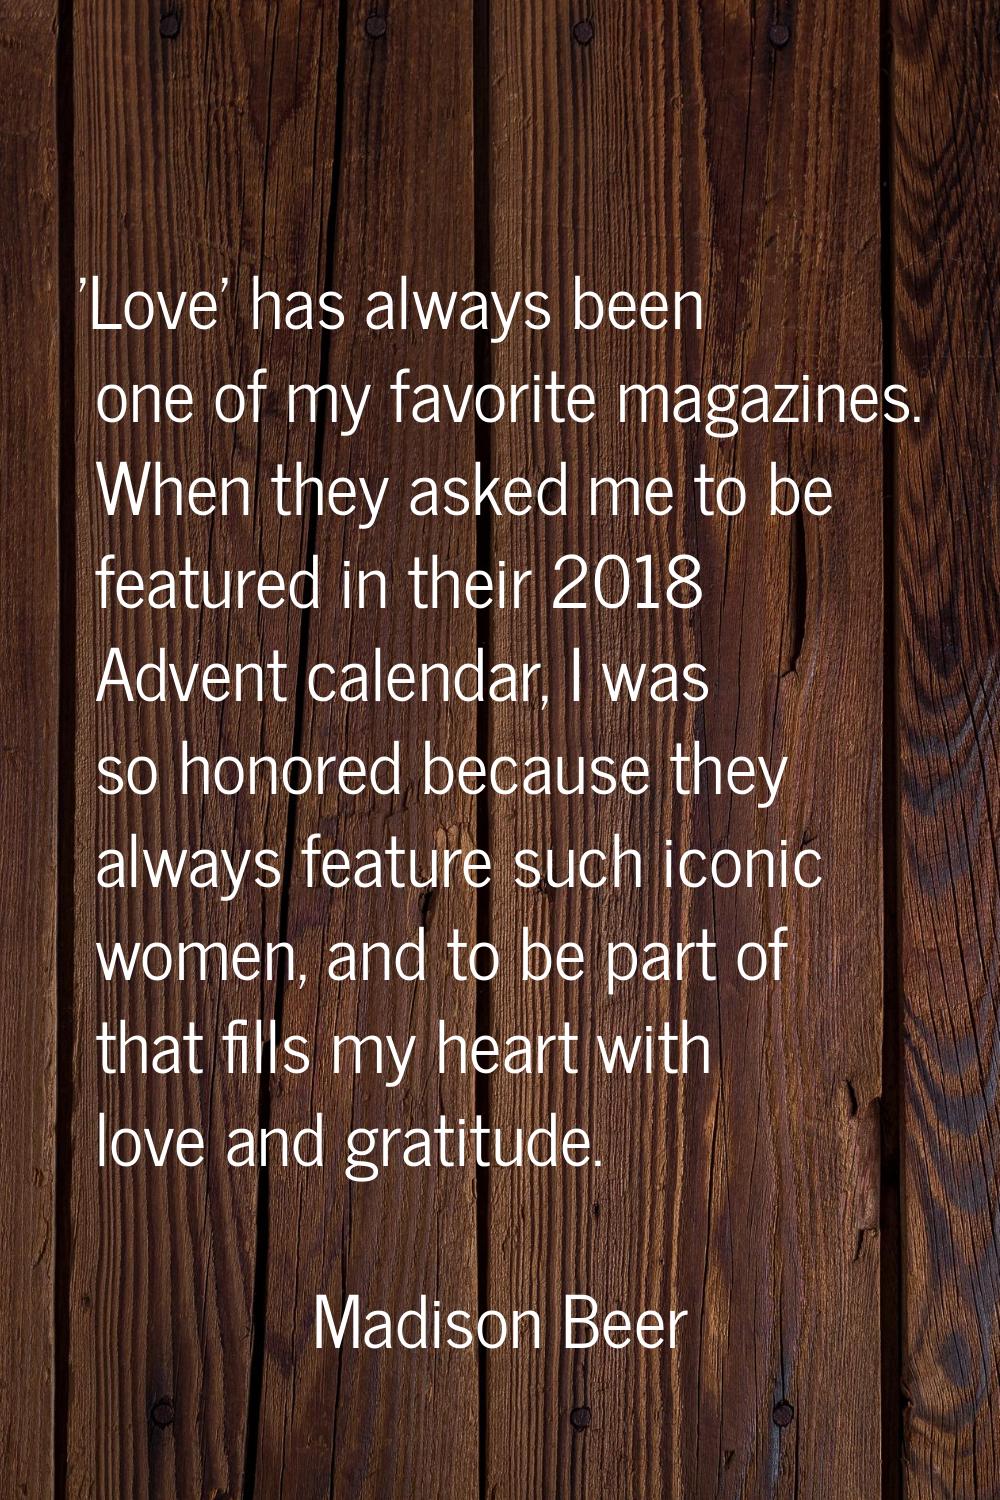 'Love' has always been one of my favorite magazines. When they asked me to be featured in their 201